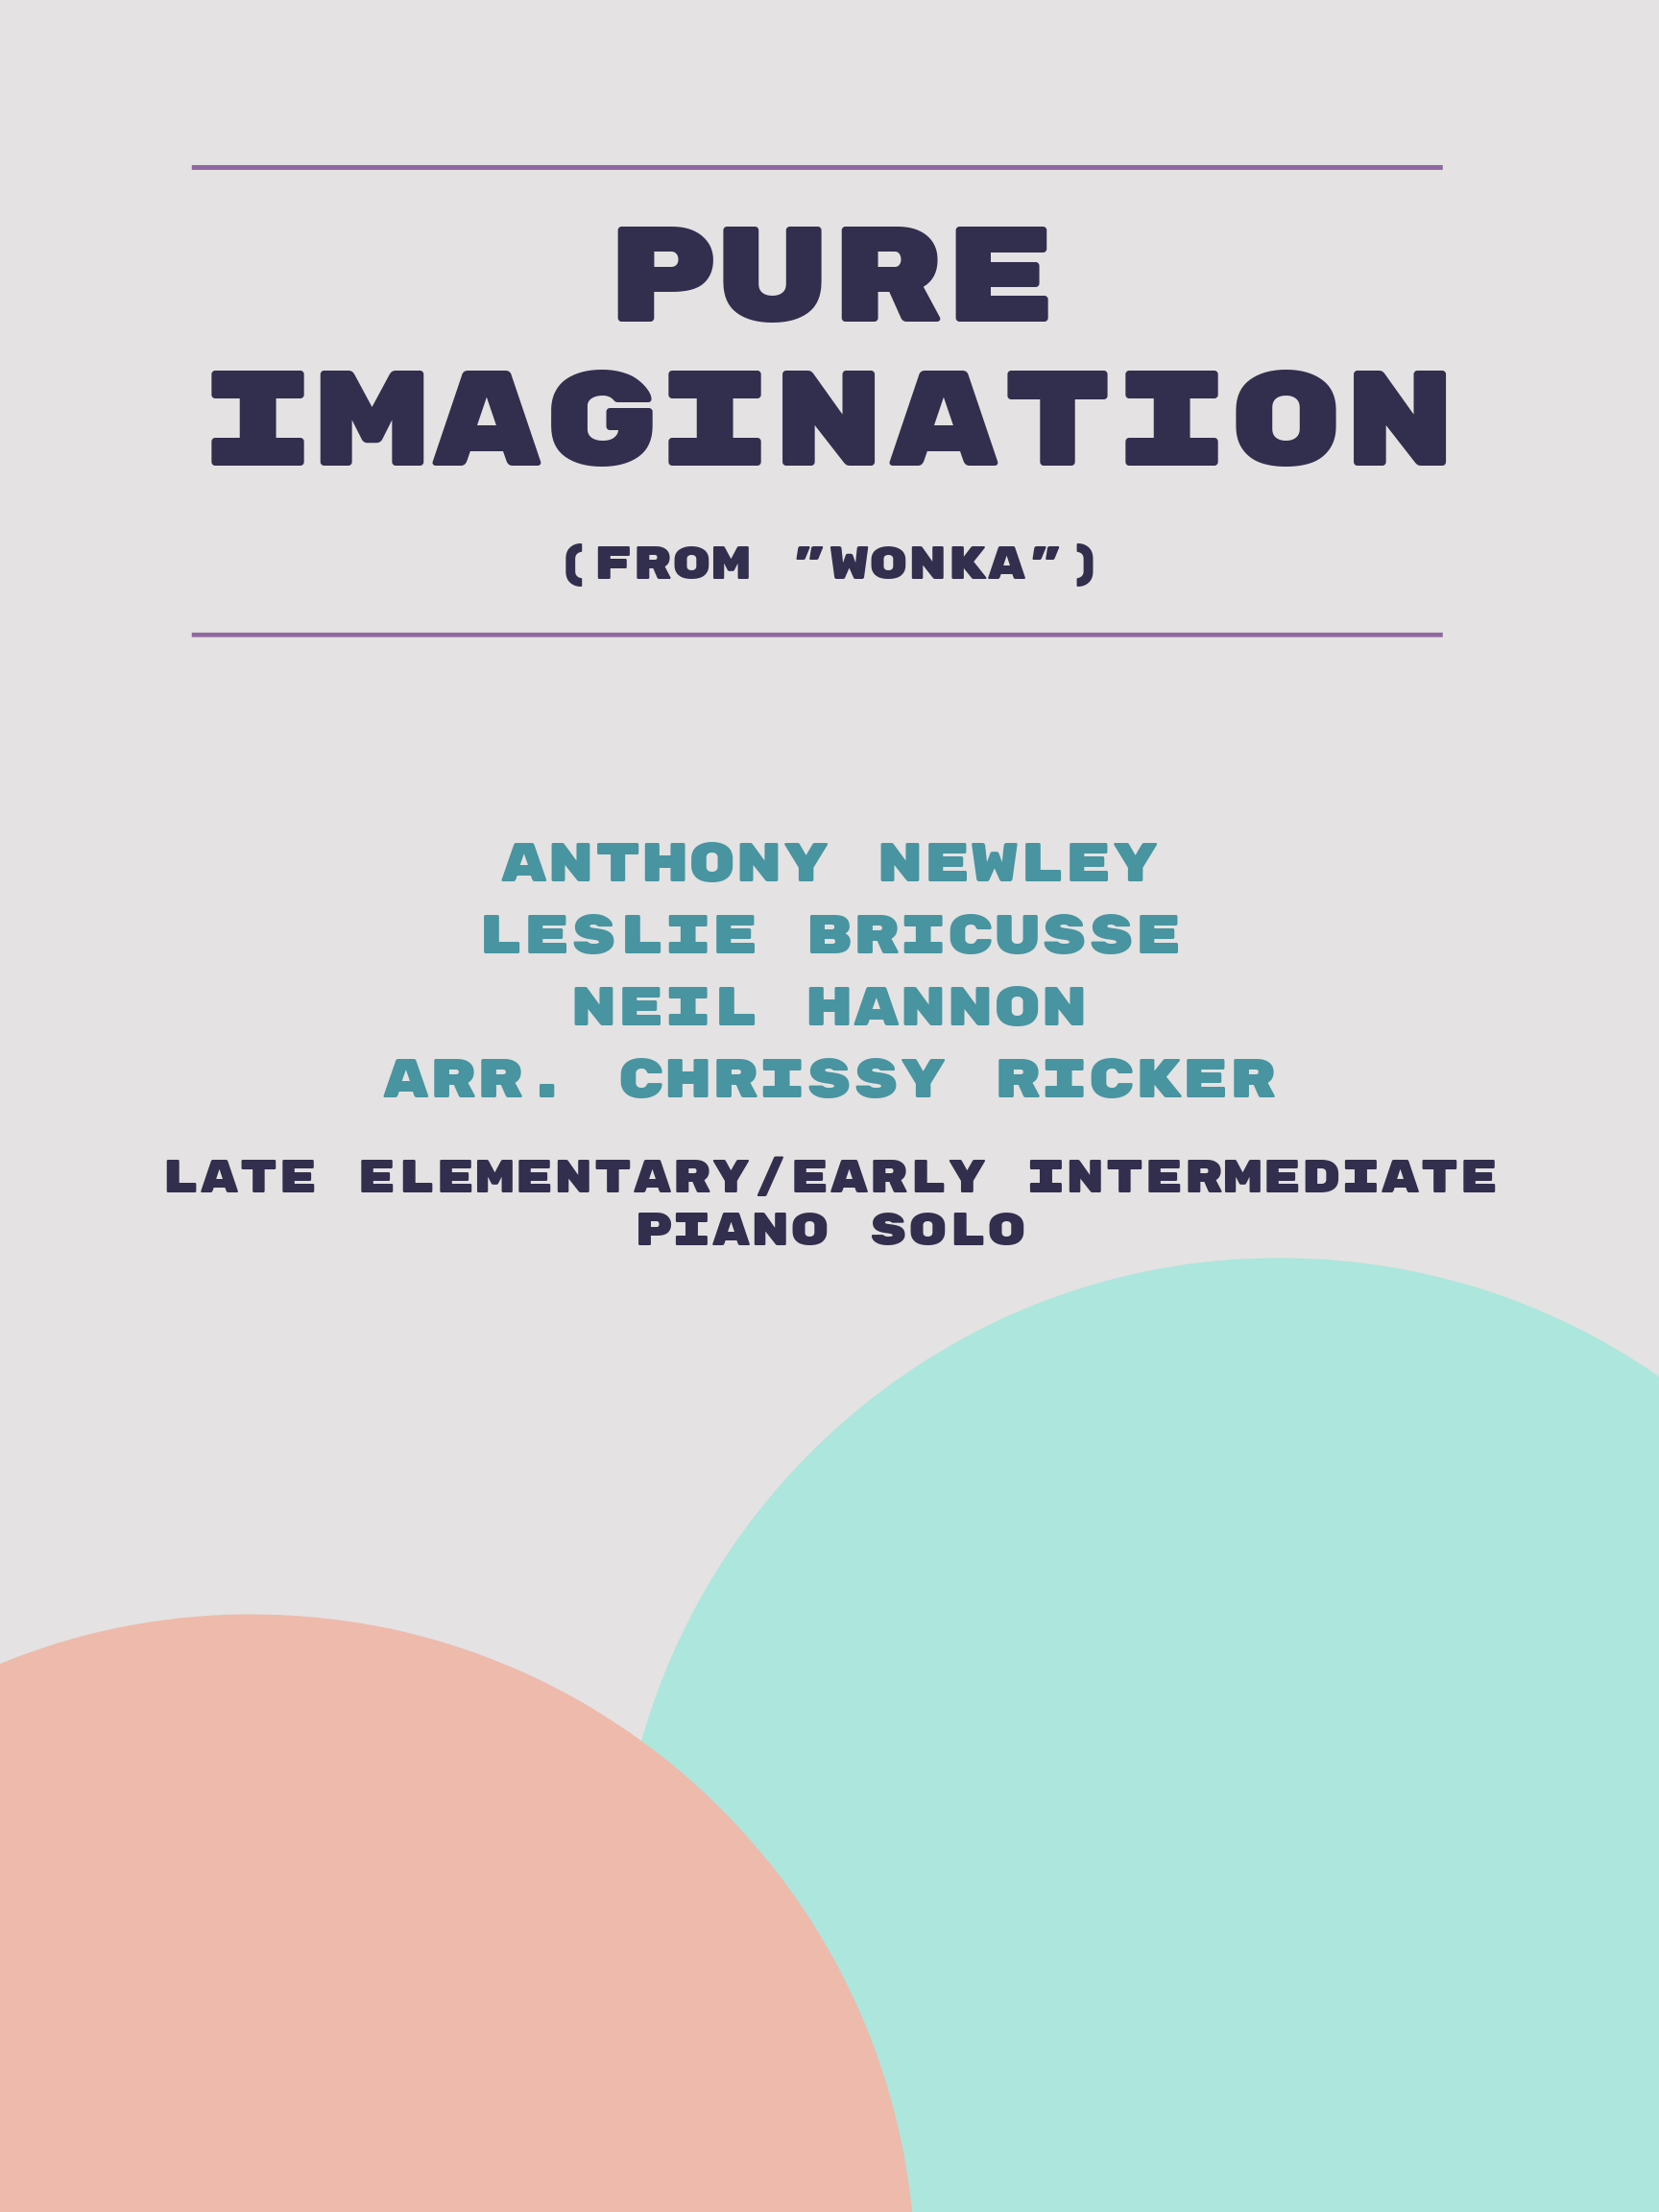 Pure Imagination by Anthony Newley, Leslie Bricusse, Neil Hannon